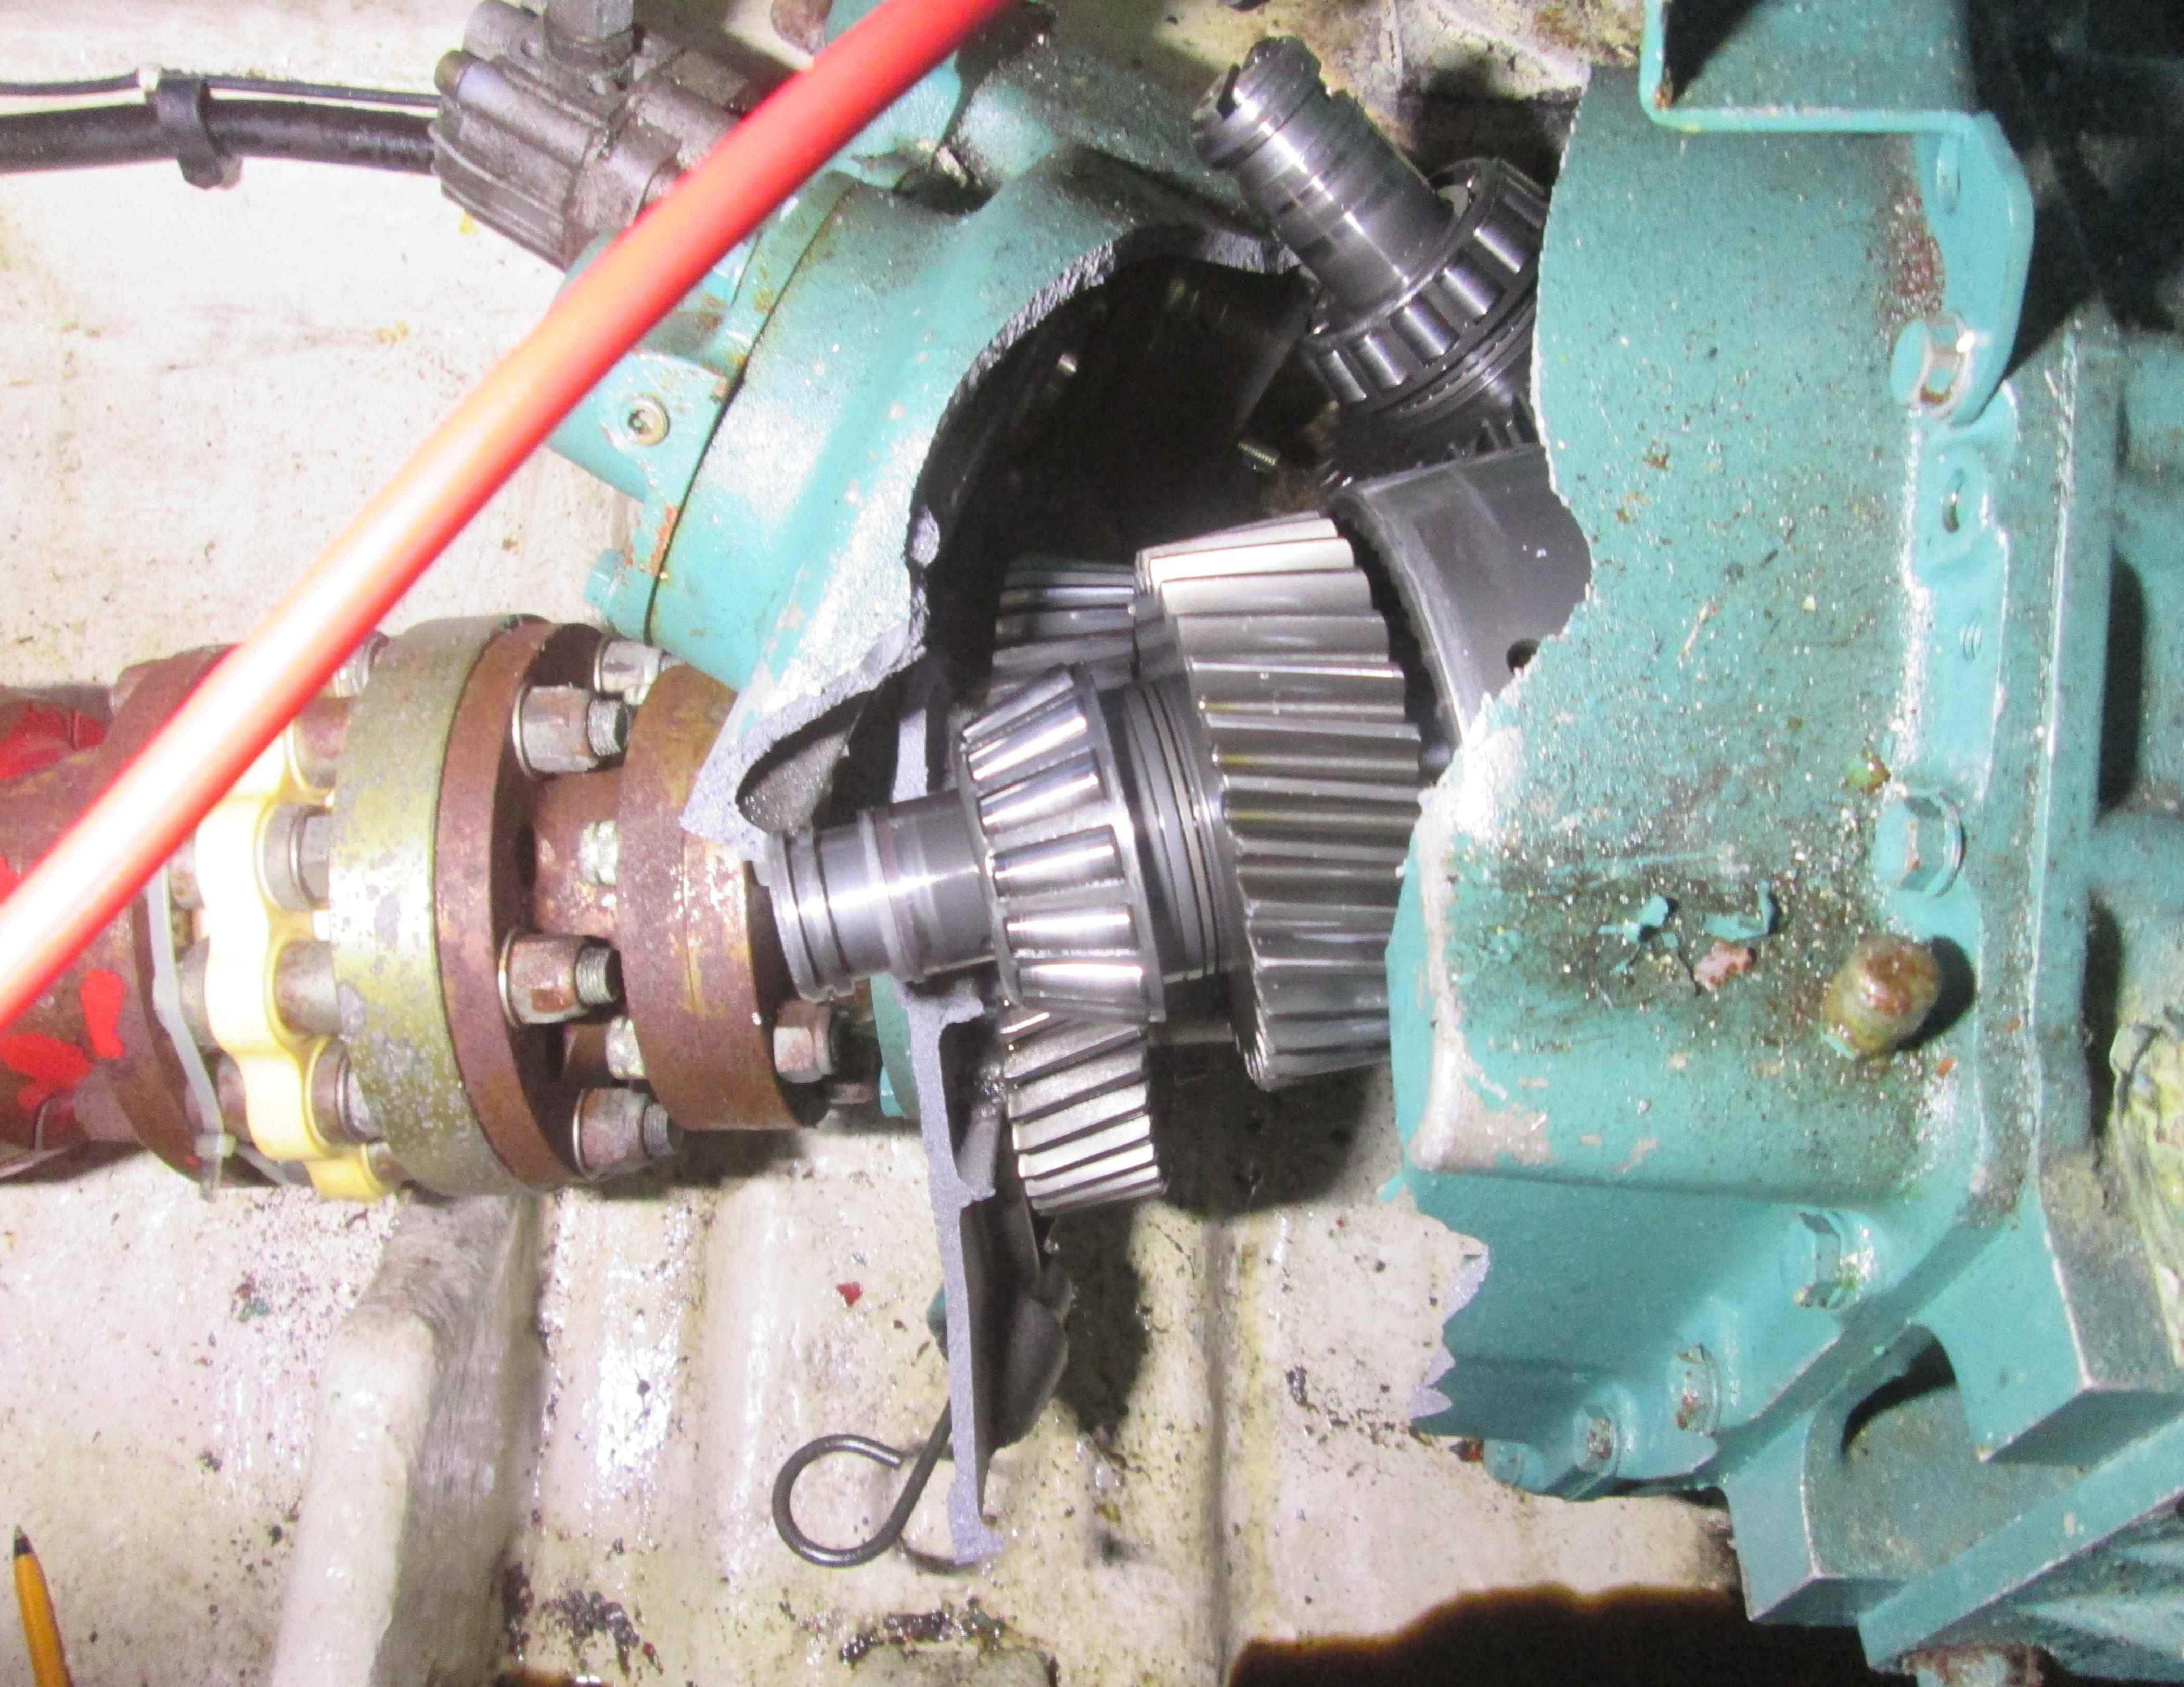 Destroyed gearbox after grounding